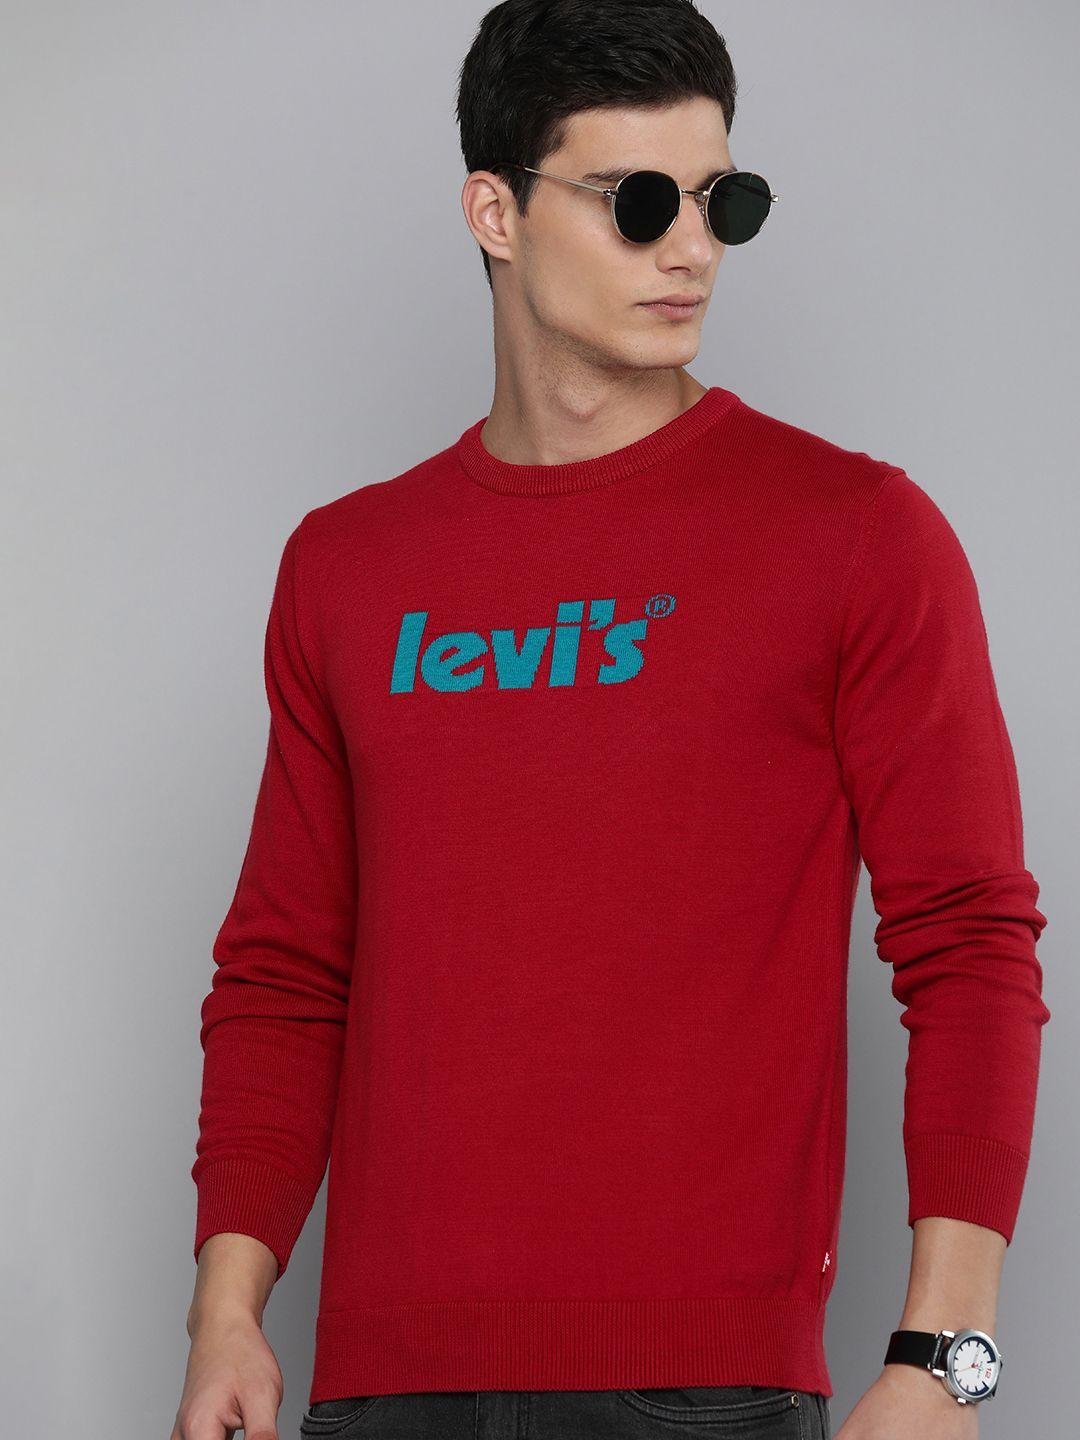 levis-pure-cotton-brand-logo-printed-casual-pullover-sweater